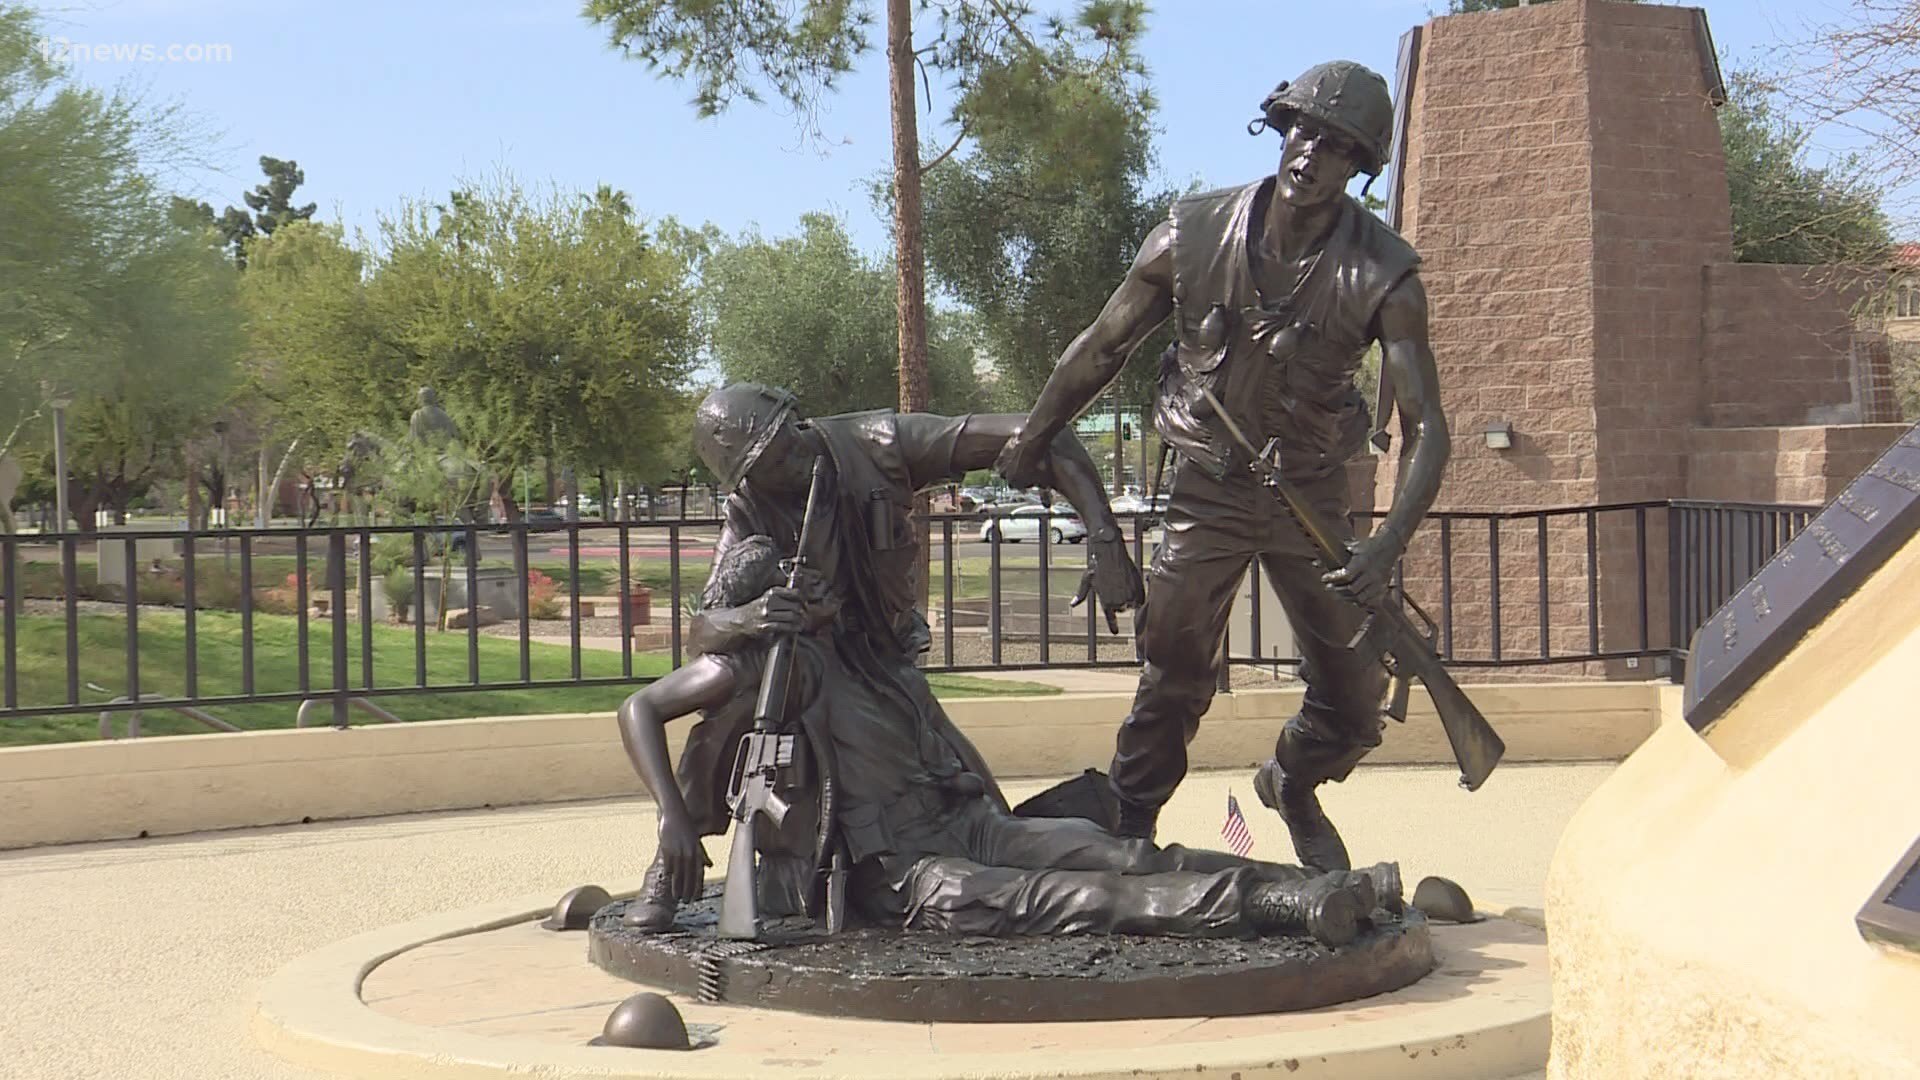 March 29th is Vietnam Veteran's Day. To honor those who served in the war some Valley veterans cleaned up the Arizona Capitol memorial ahead of the day.